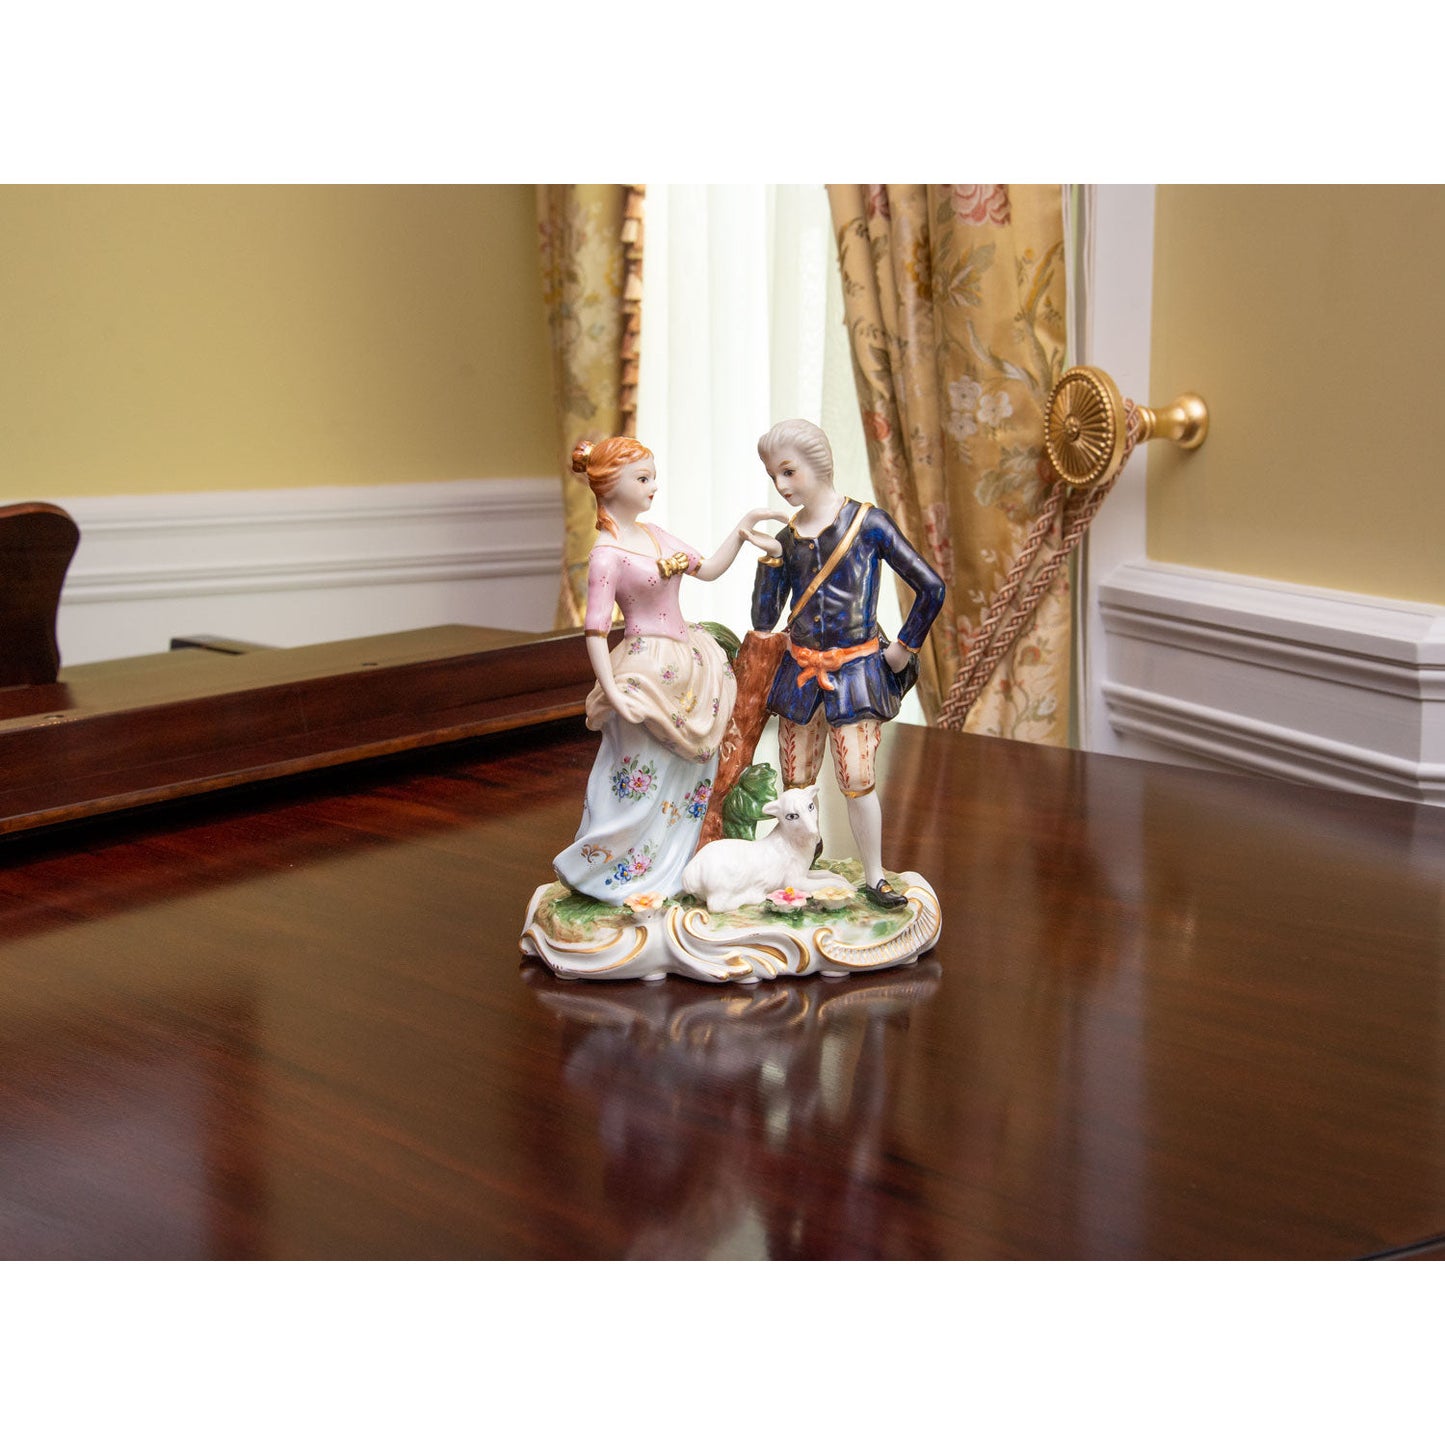 Courtship Hand-painted Porcelain Figurine